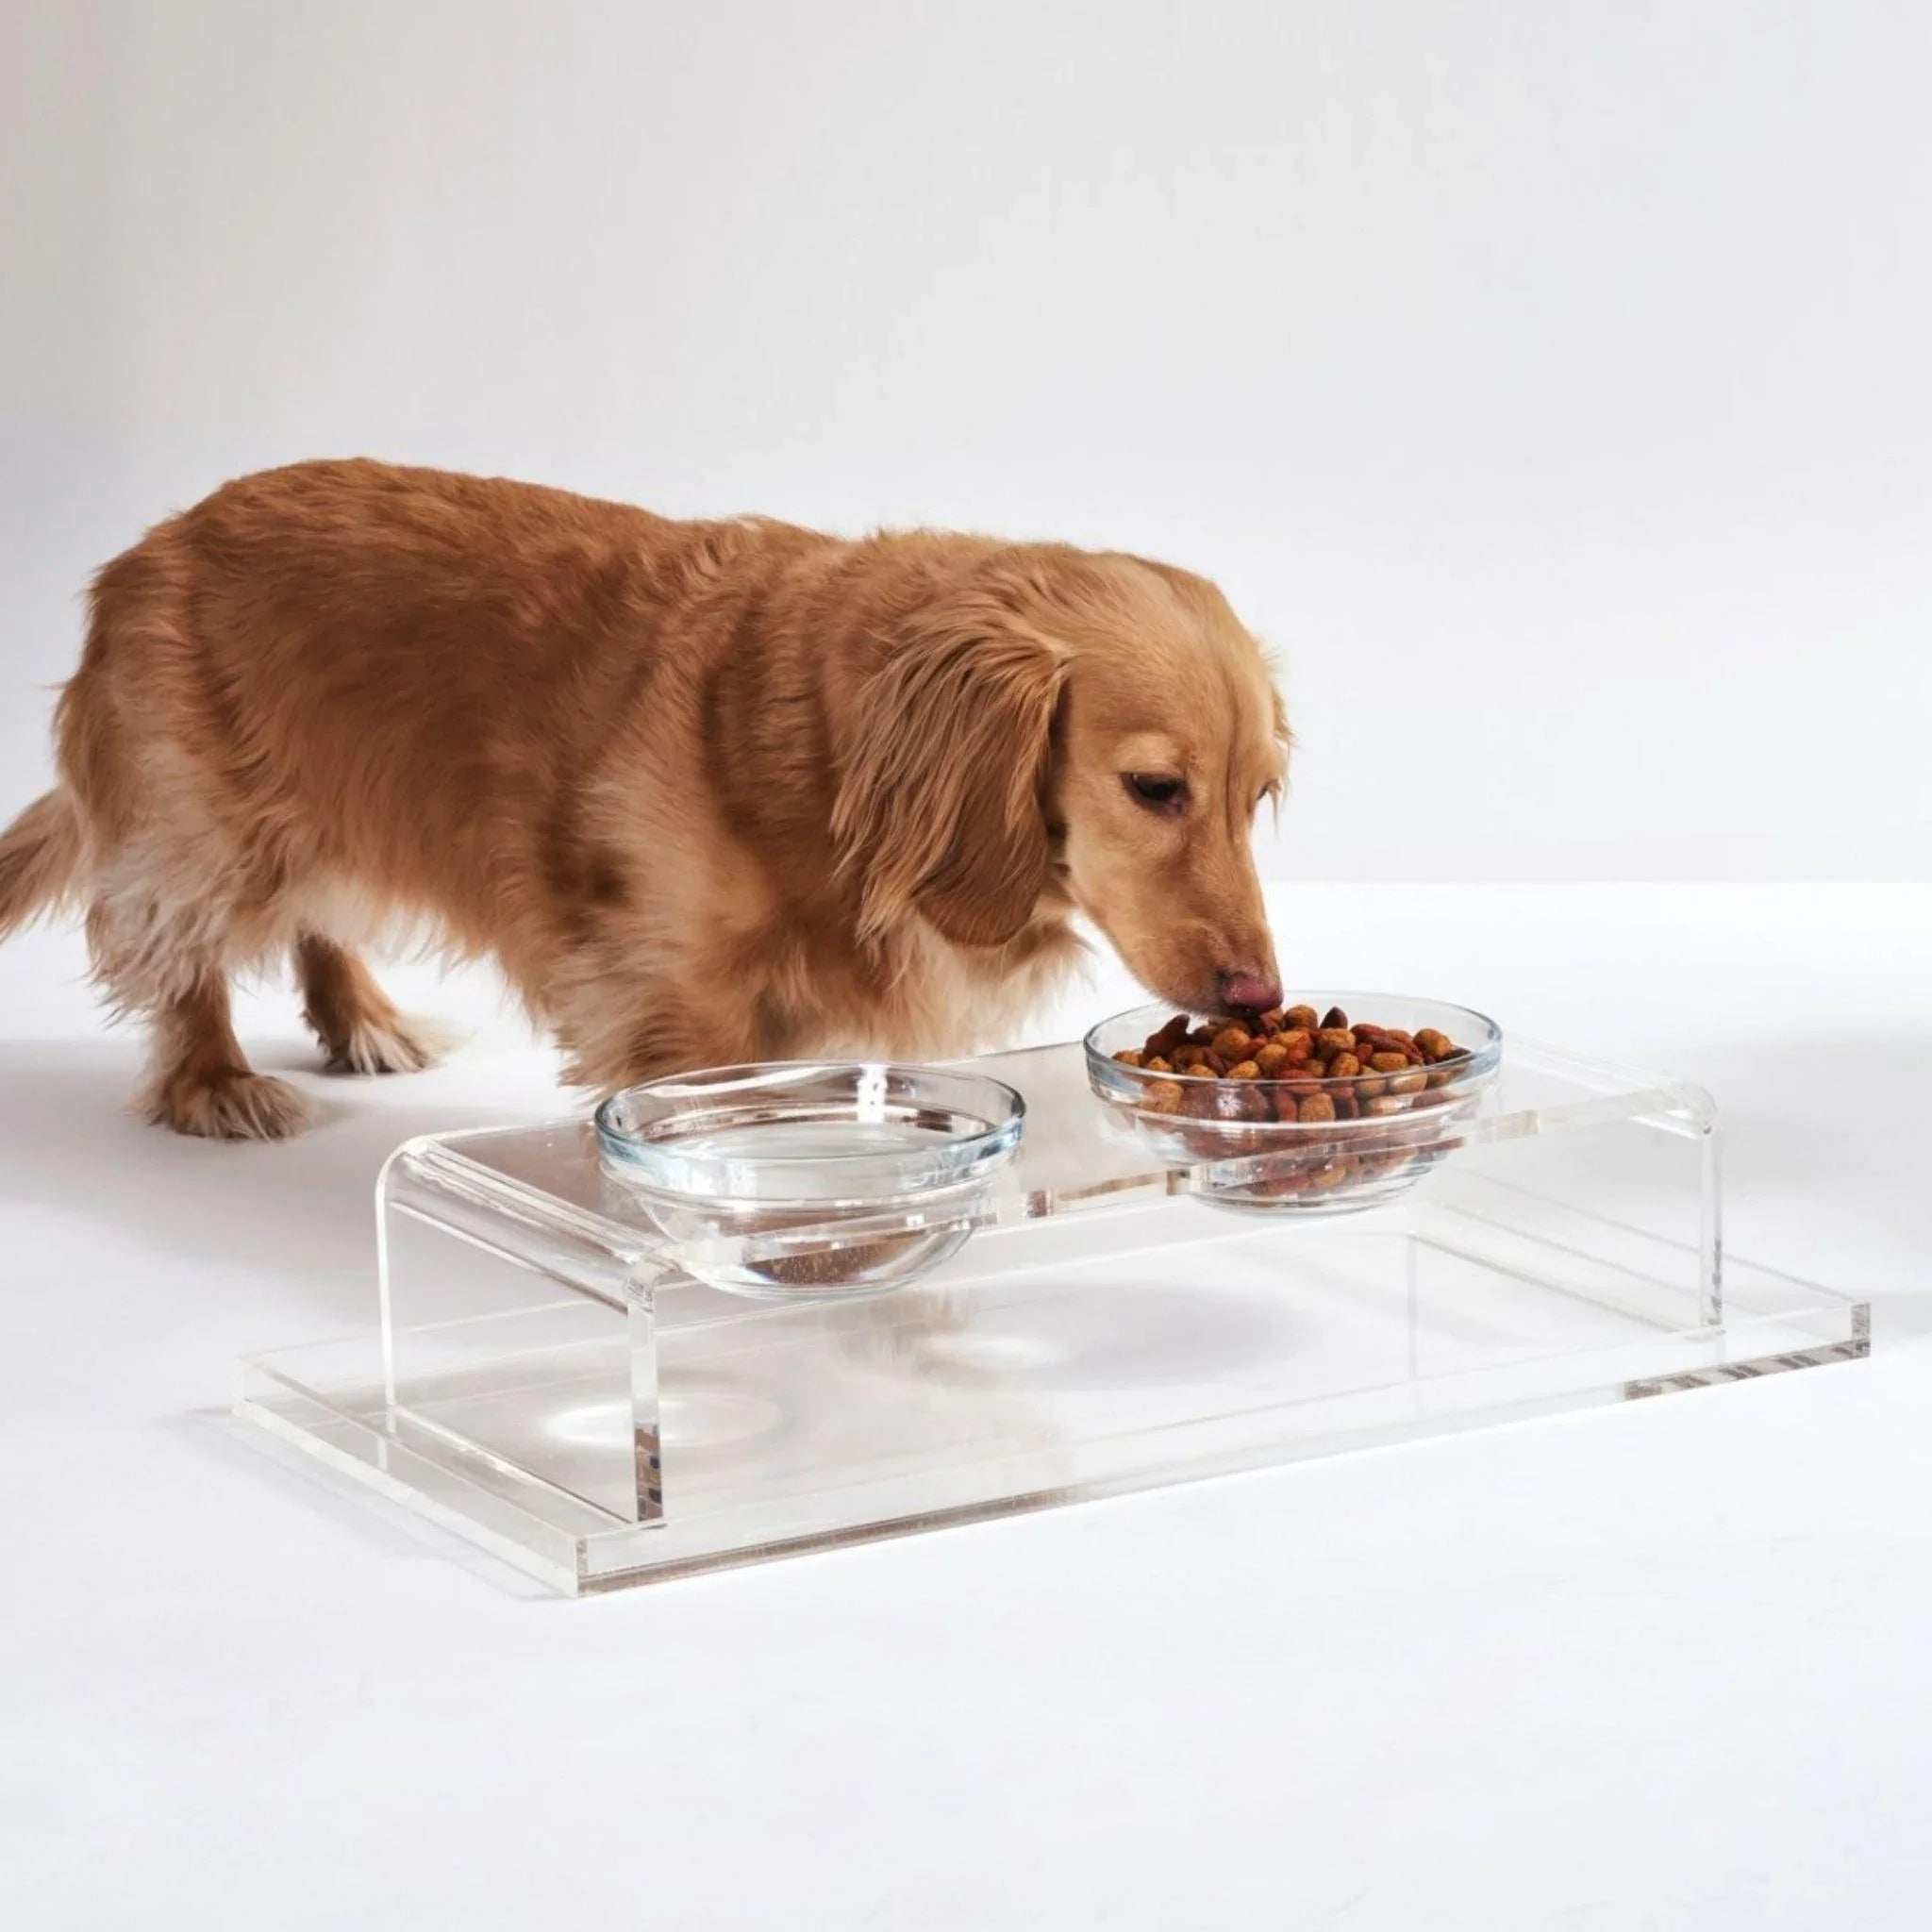 https://www.wellappointedhouse.com/cdn/shop/files/clear-double-dog-bowl-feeder-with-1-pint-glass-bowls-pet-accessories-the-well-appointed-house-2_a51b1bd8-cbbb-4a69-b5c9-6a88e7a88399.webp?v=1691683638